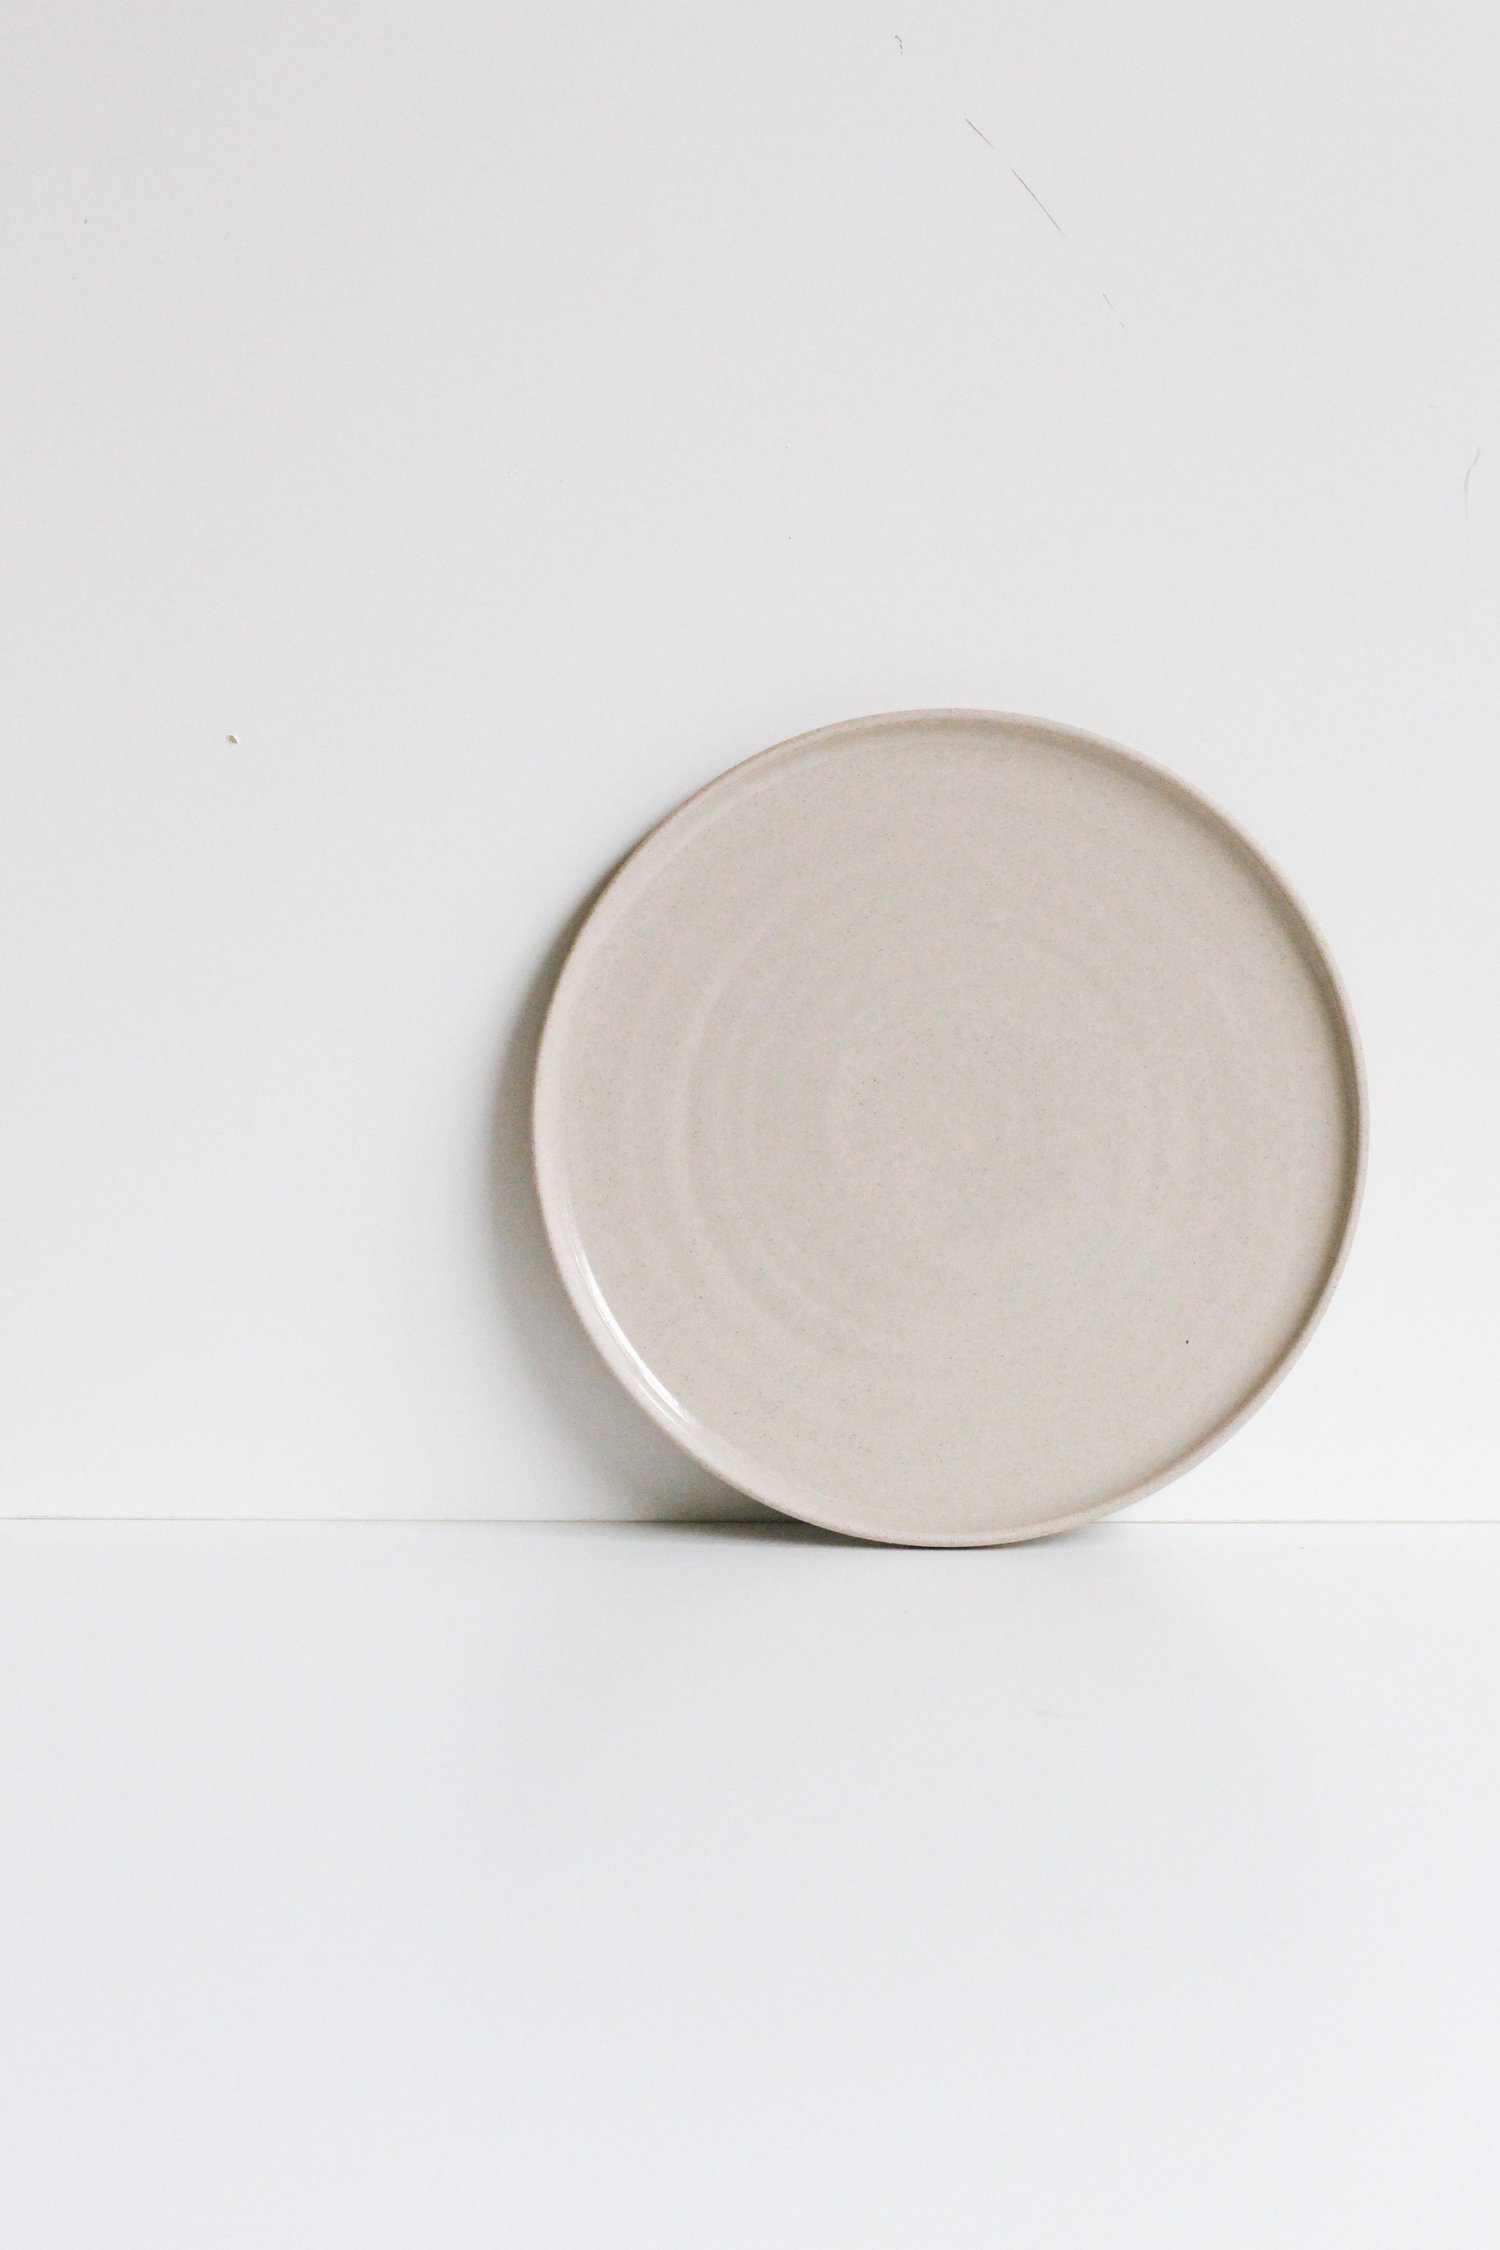 Image of Dinner Plate / Various Shades